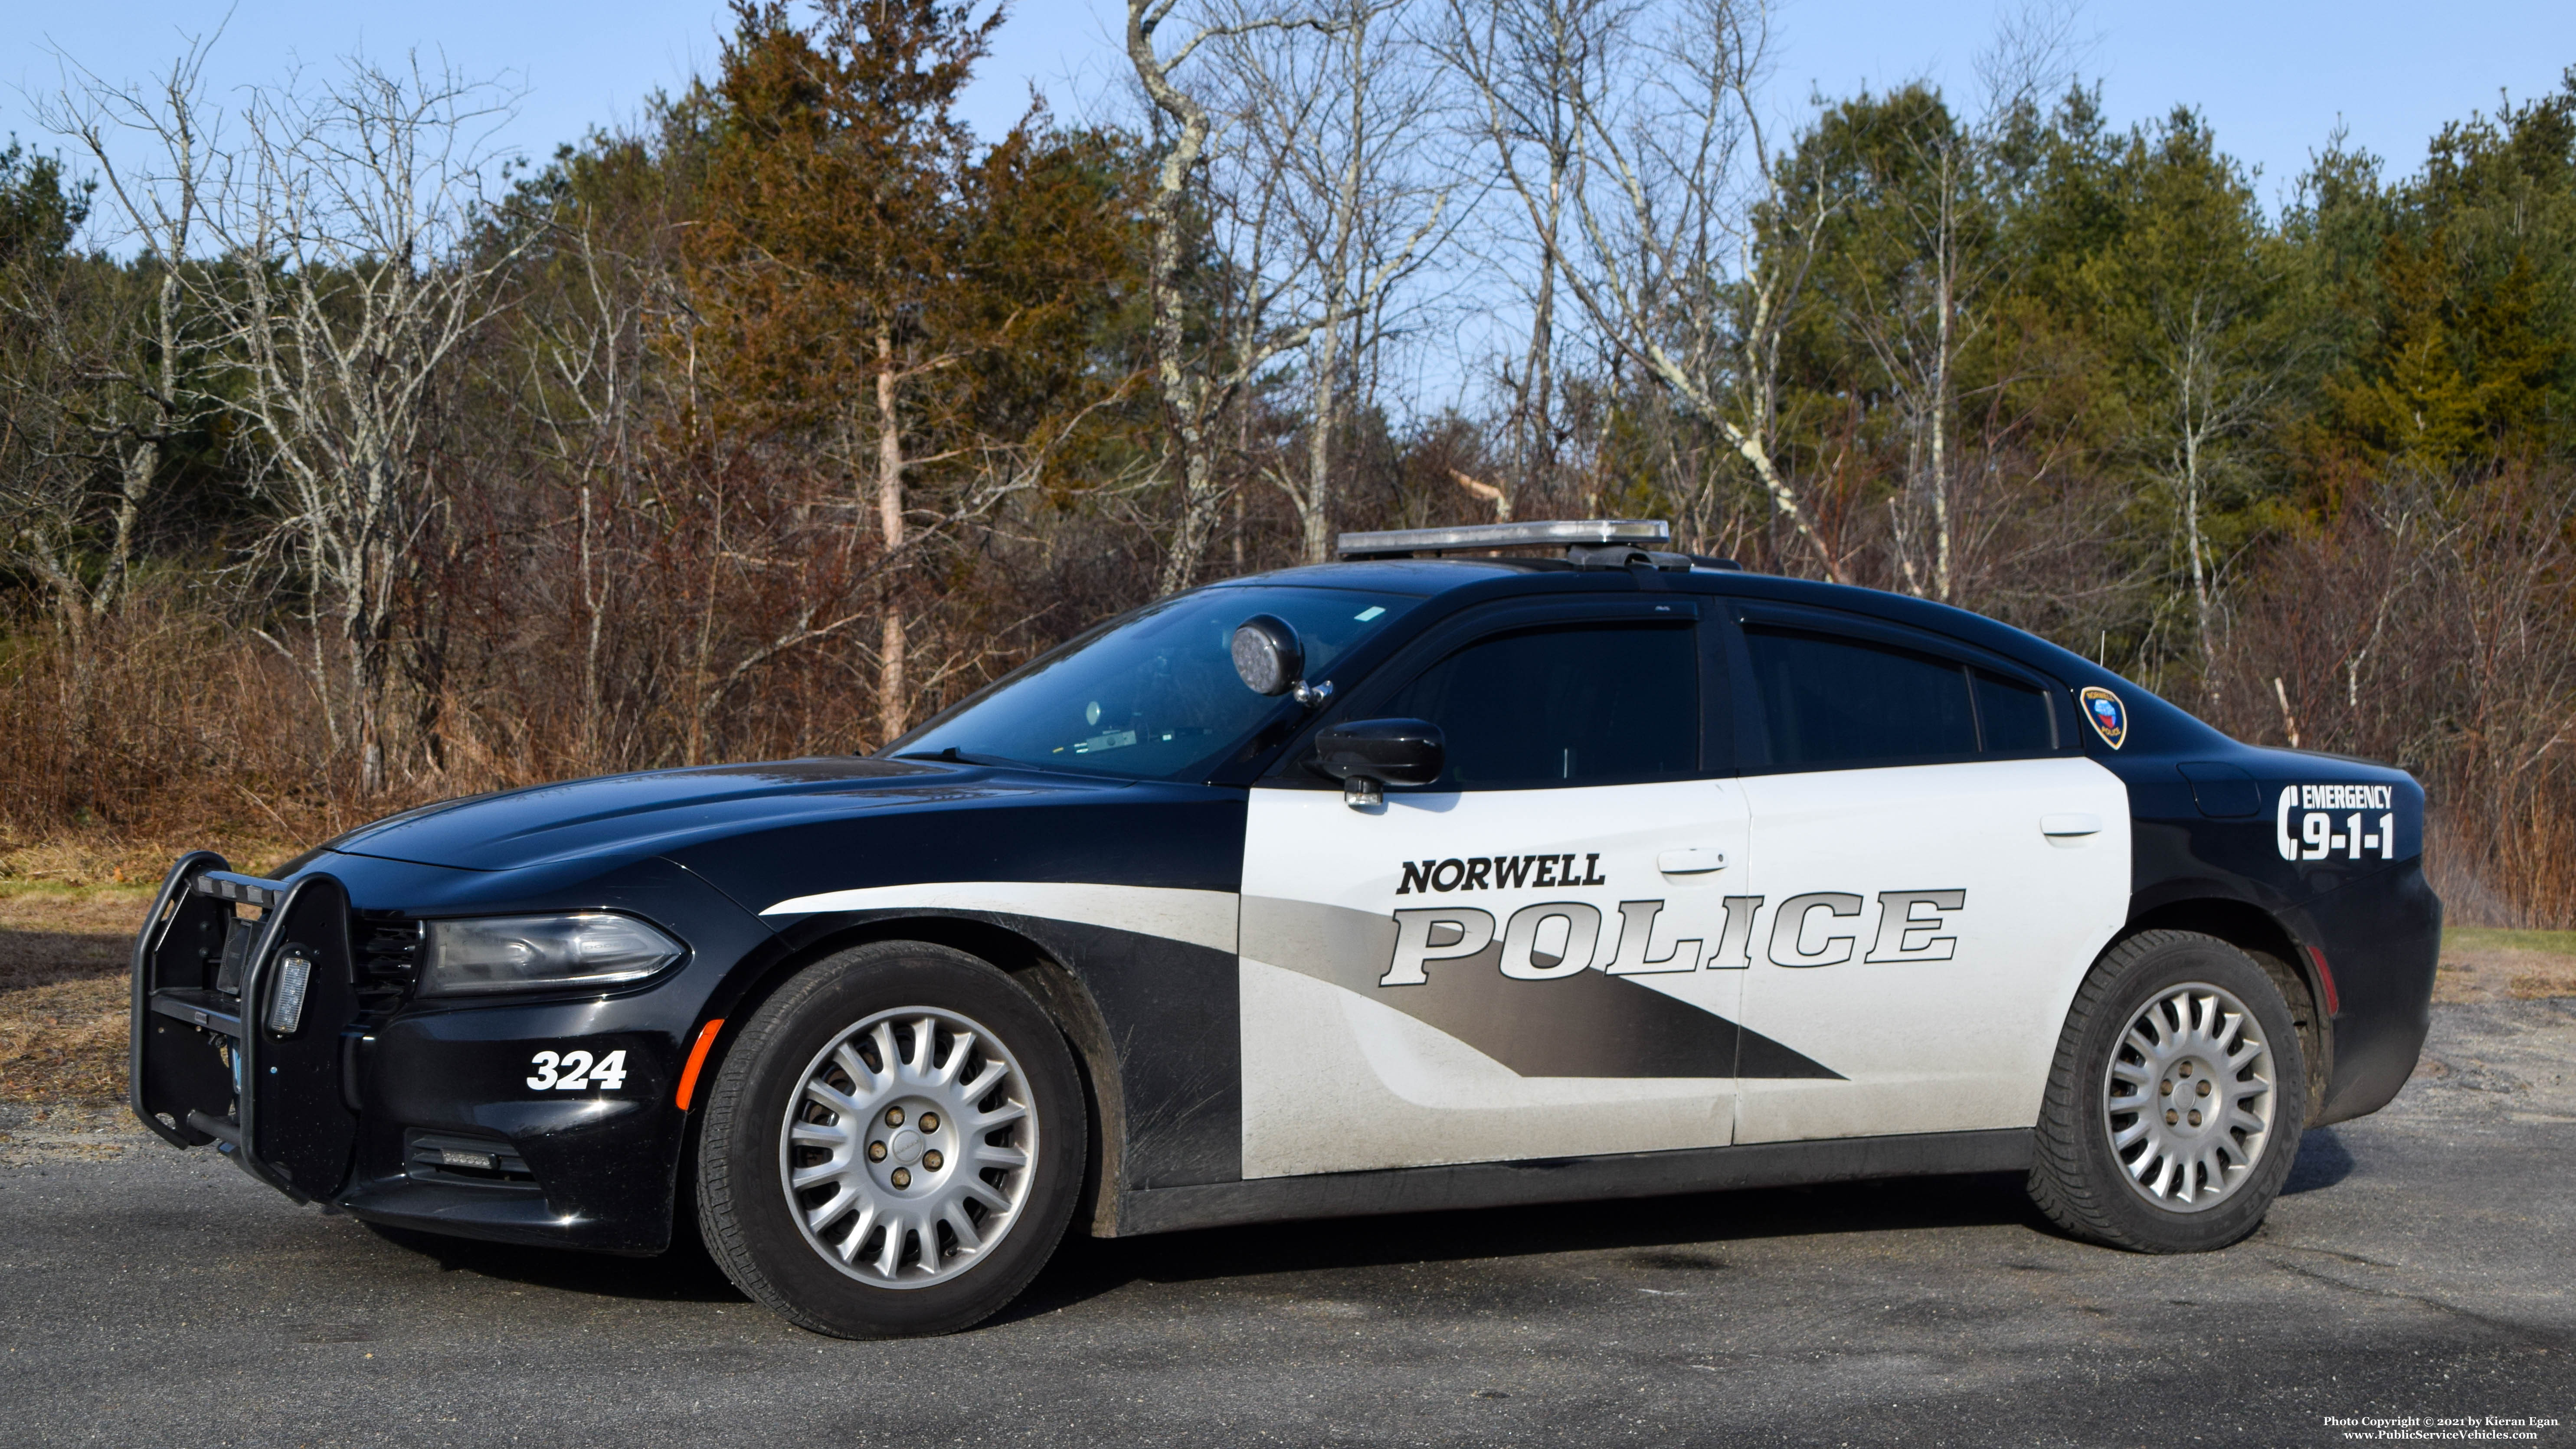 A photo  of Norwell Police
            Cruiser 324, a 2015-2019 Dodge Charger             taken by Kieran Egan